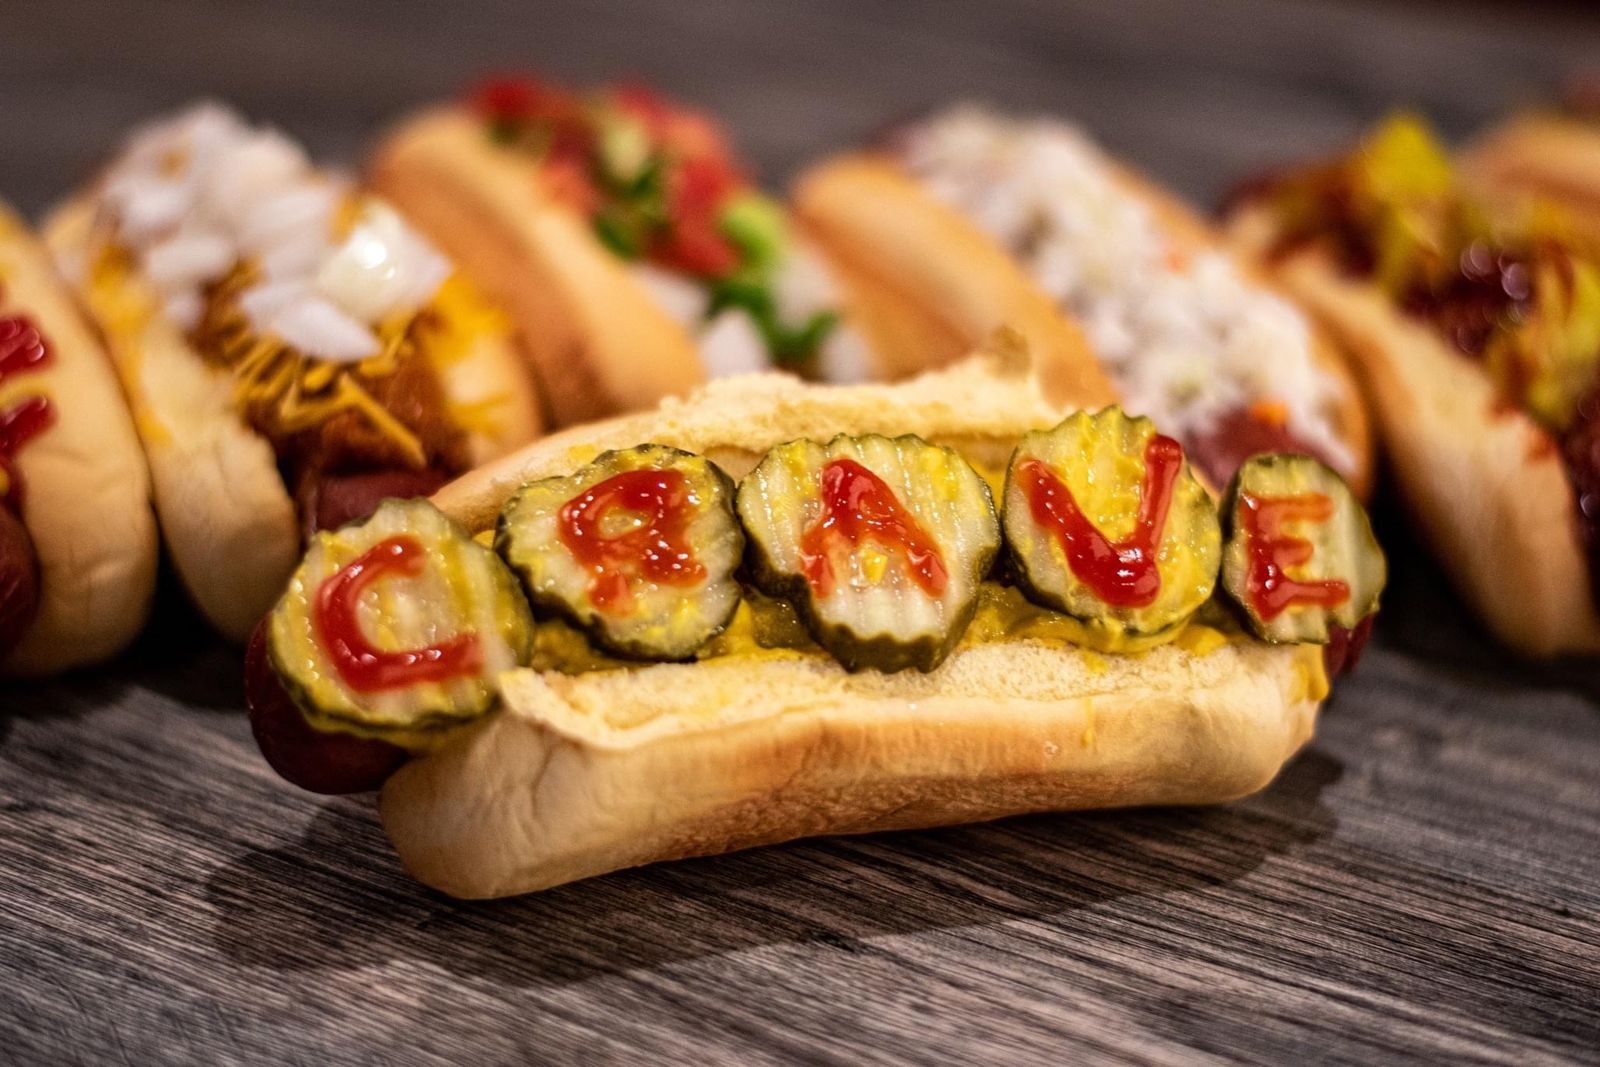 Crave Hot Dogs & BBQ Signs Franchisee in Arlington, Texas!